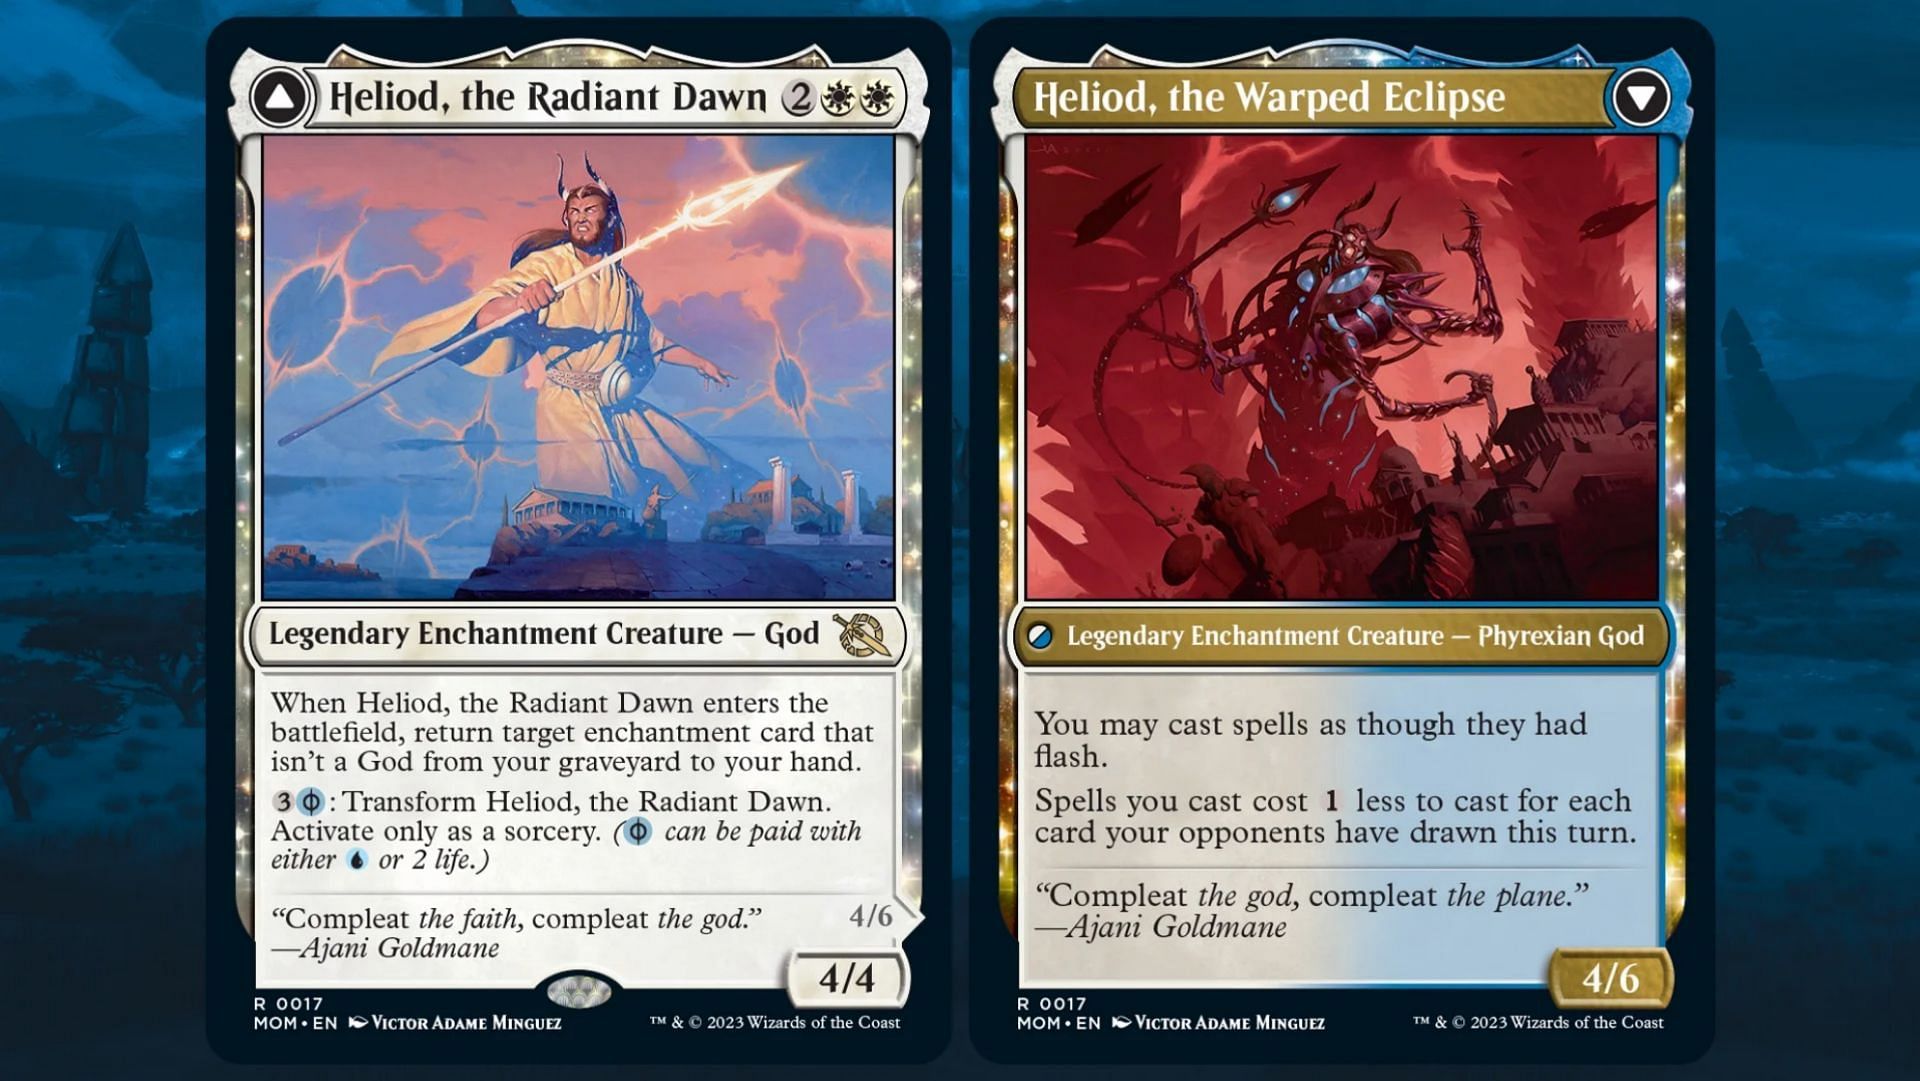 Interesting lore implications come from Heliod, the Radiant Dawn in Magic: The Gathering